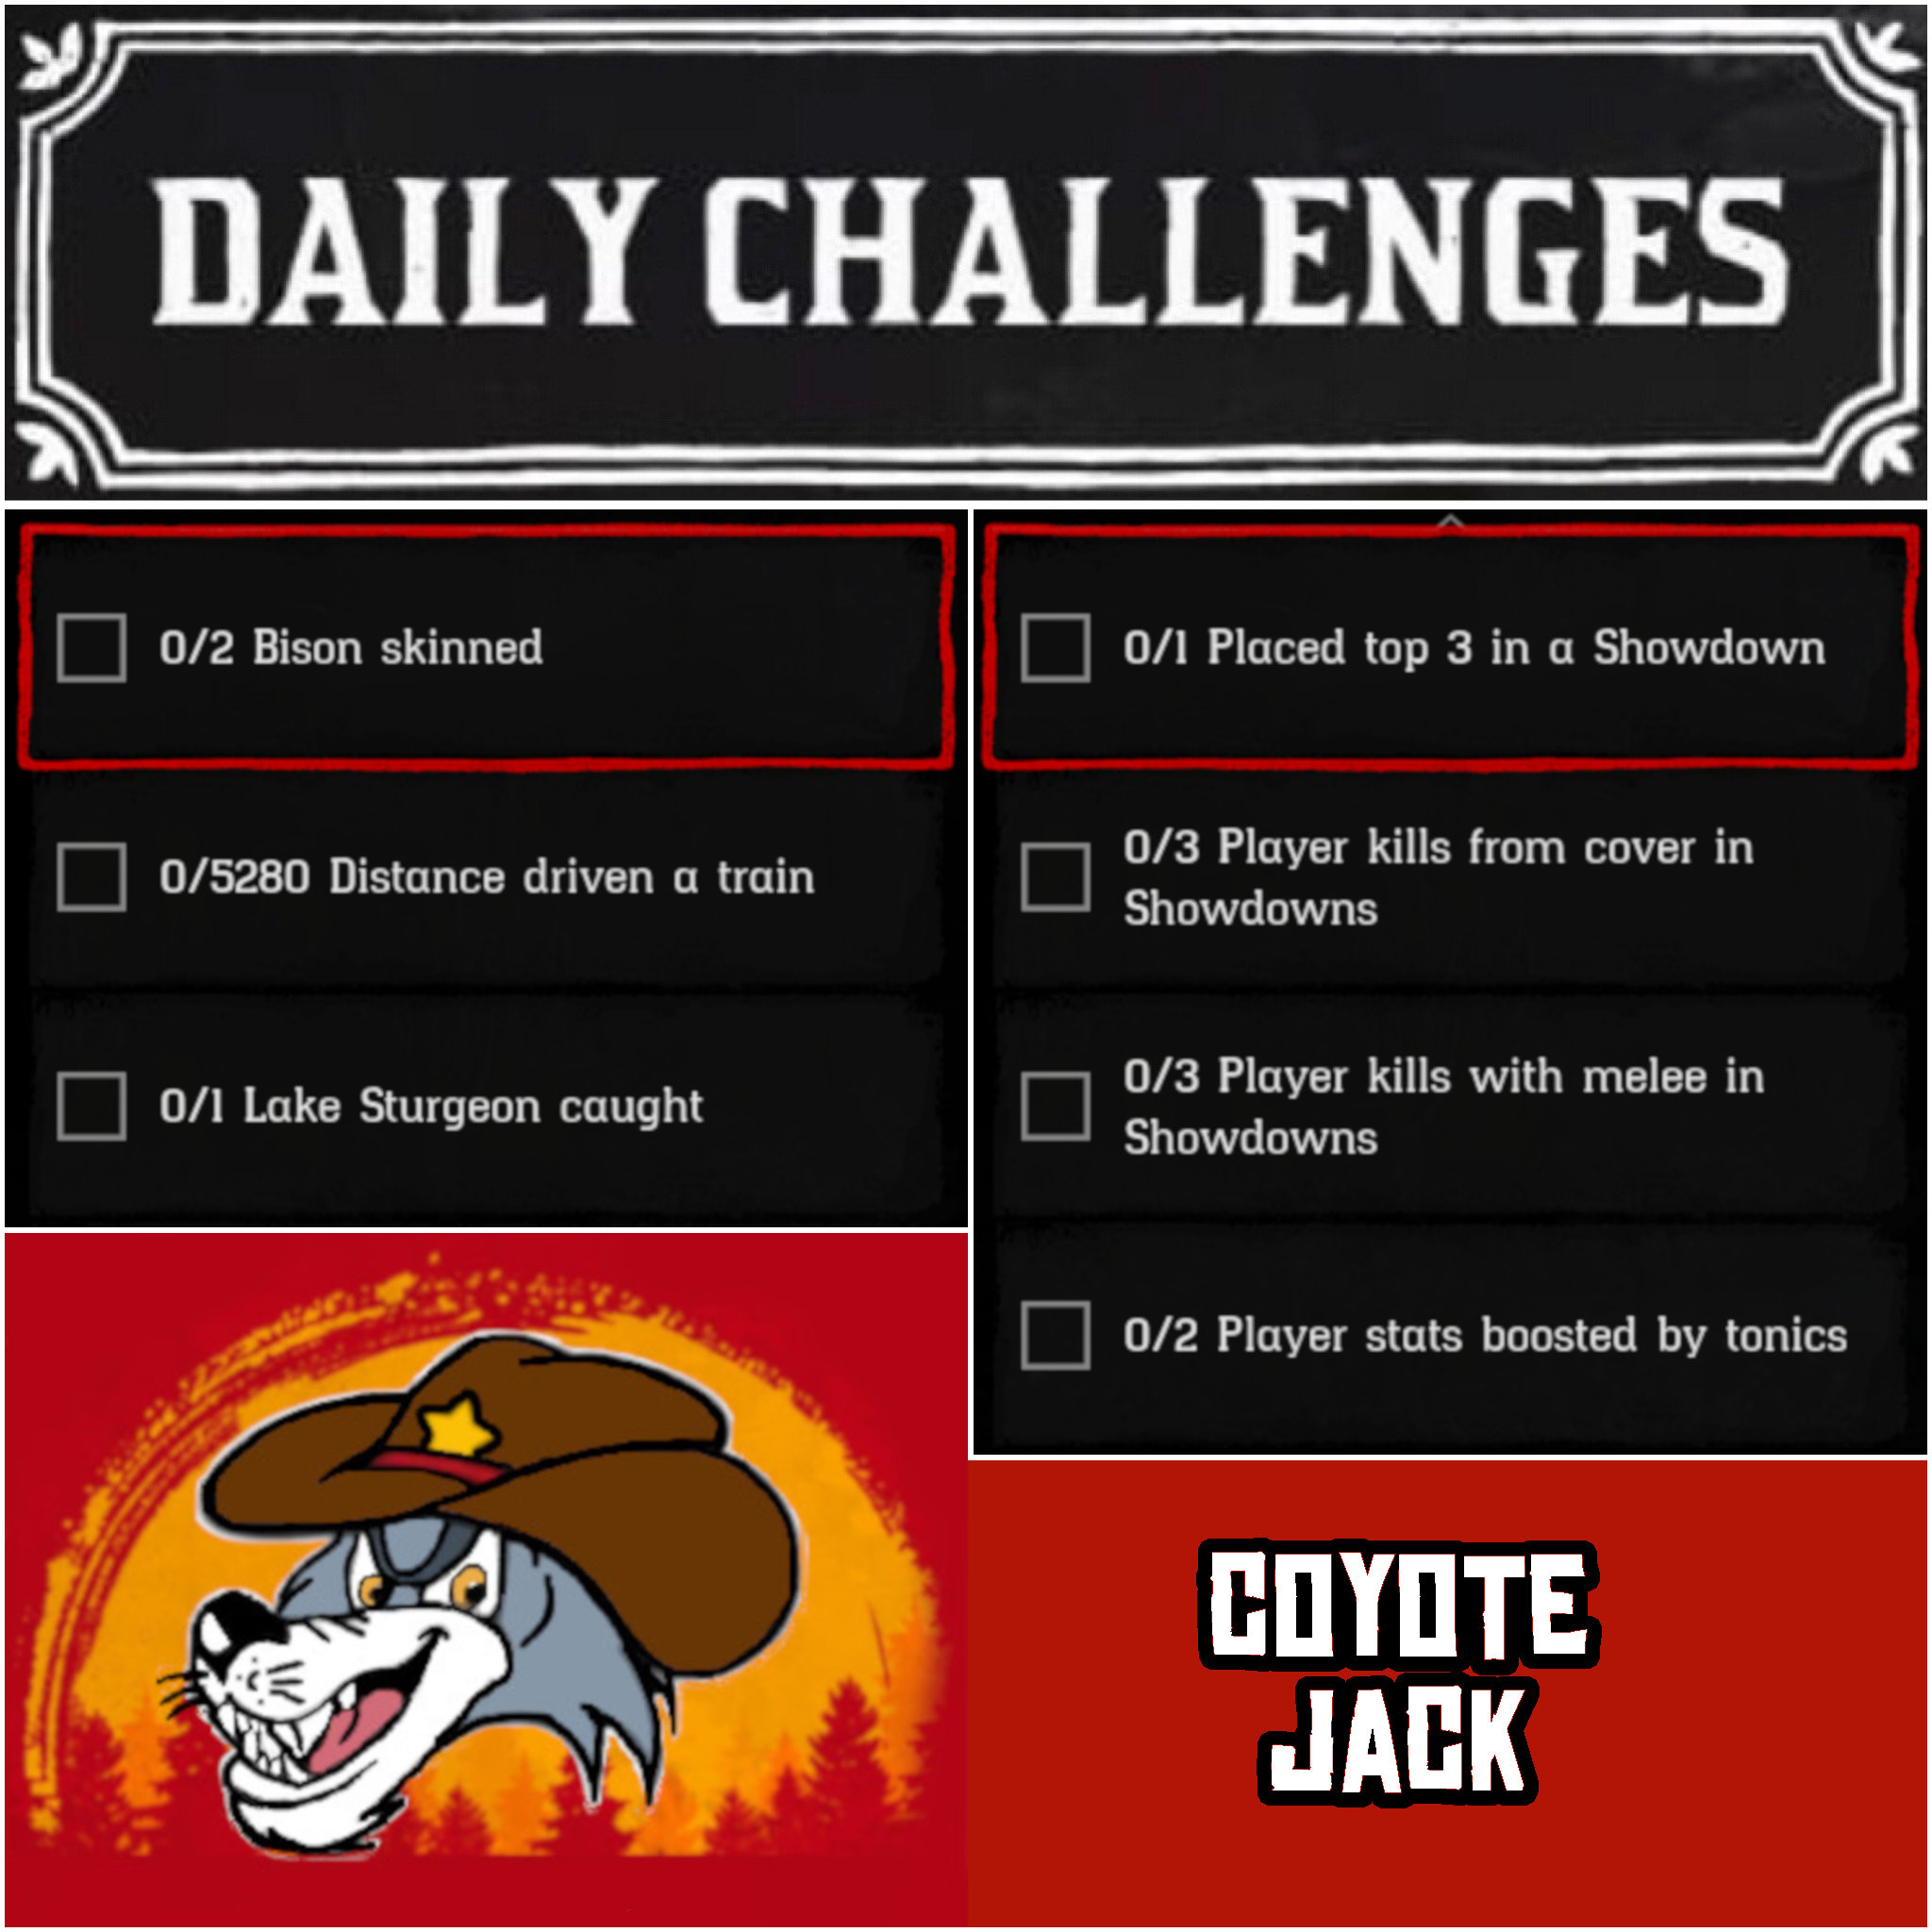 You are currently viewing Tuesday 09 March Daily Challenges